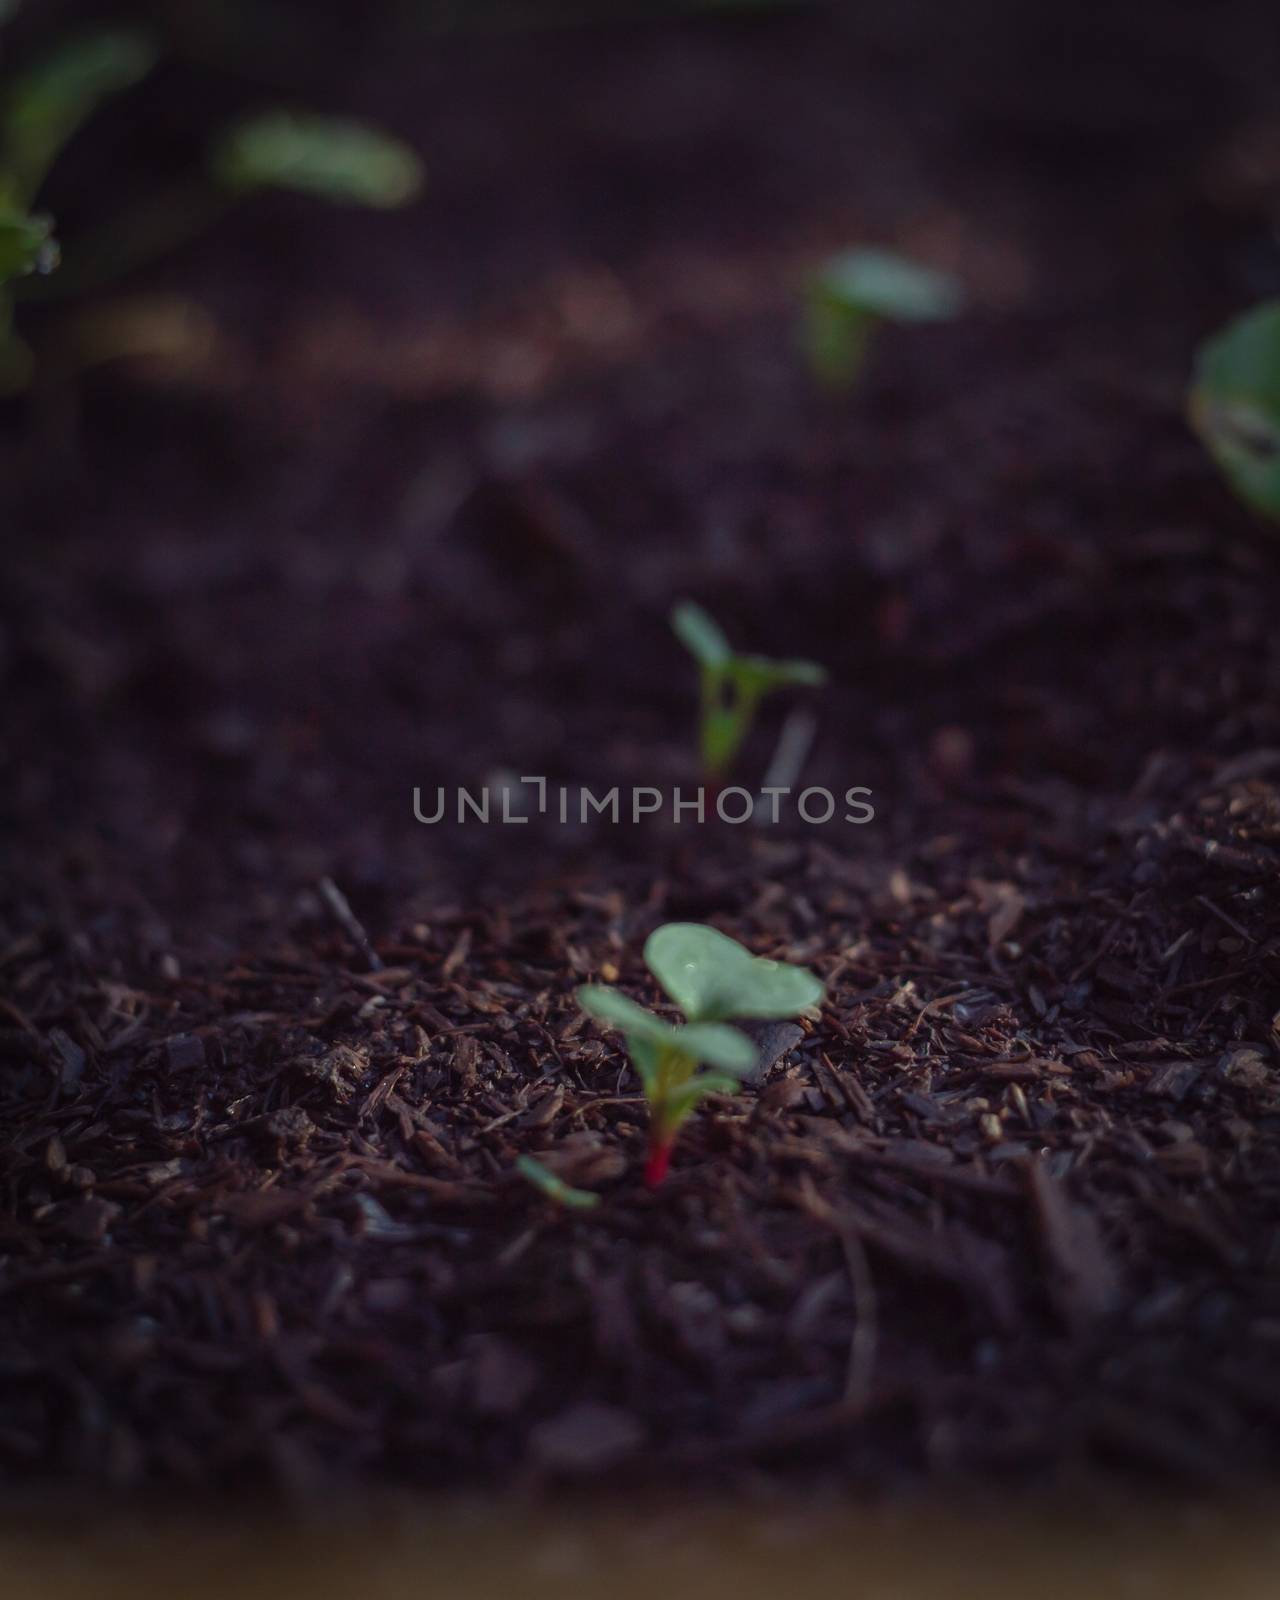 Filtered image organic radish sprouts growing on kitchen garden bed by trongnguyen